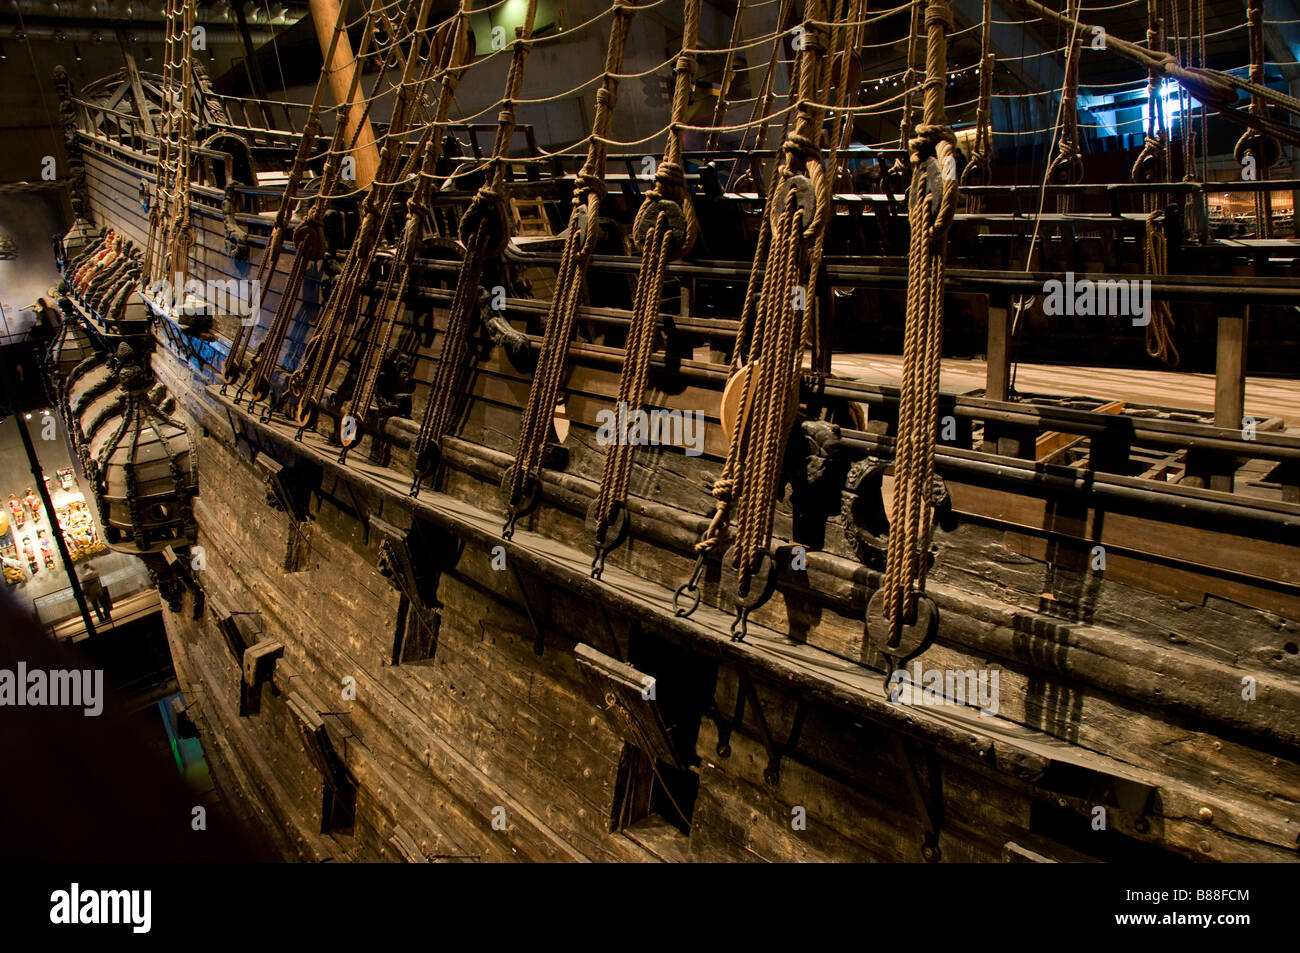 Page 6 - The Vasa High Resolution Stock Photography and Images - Alamy